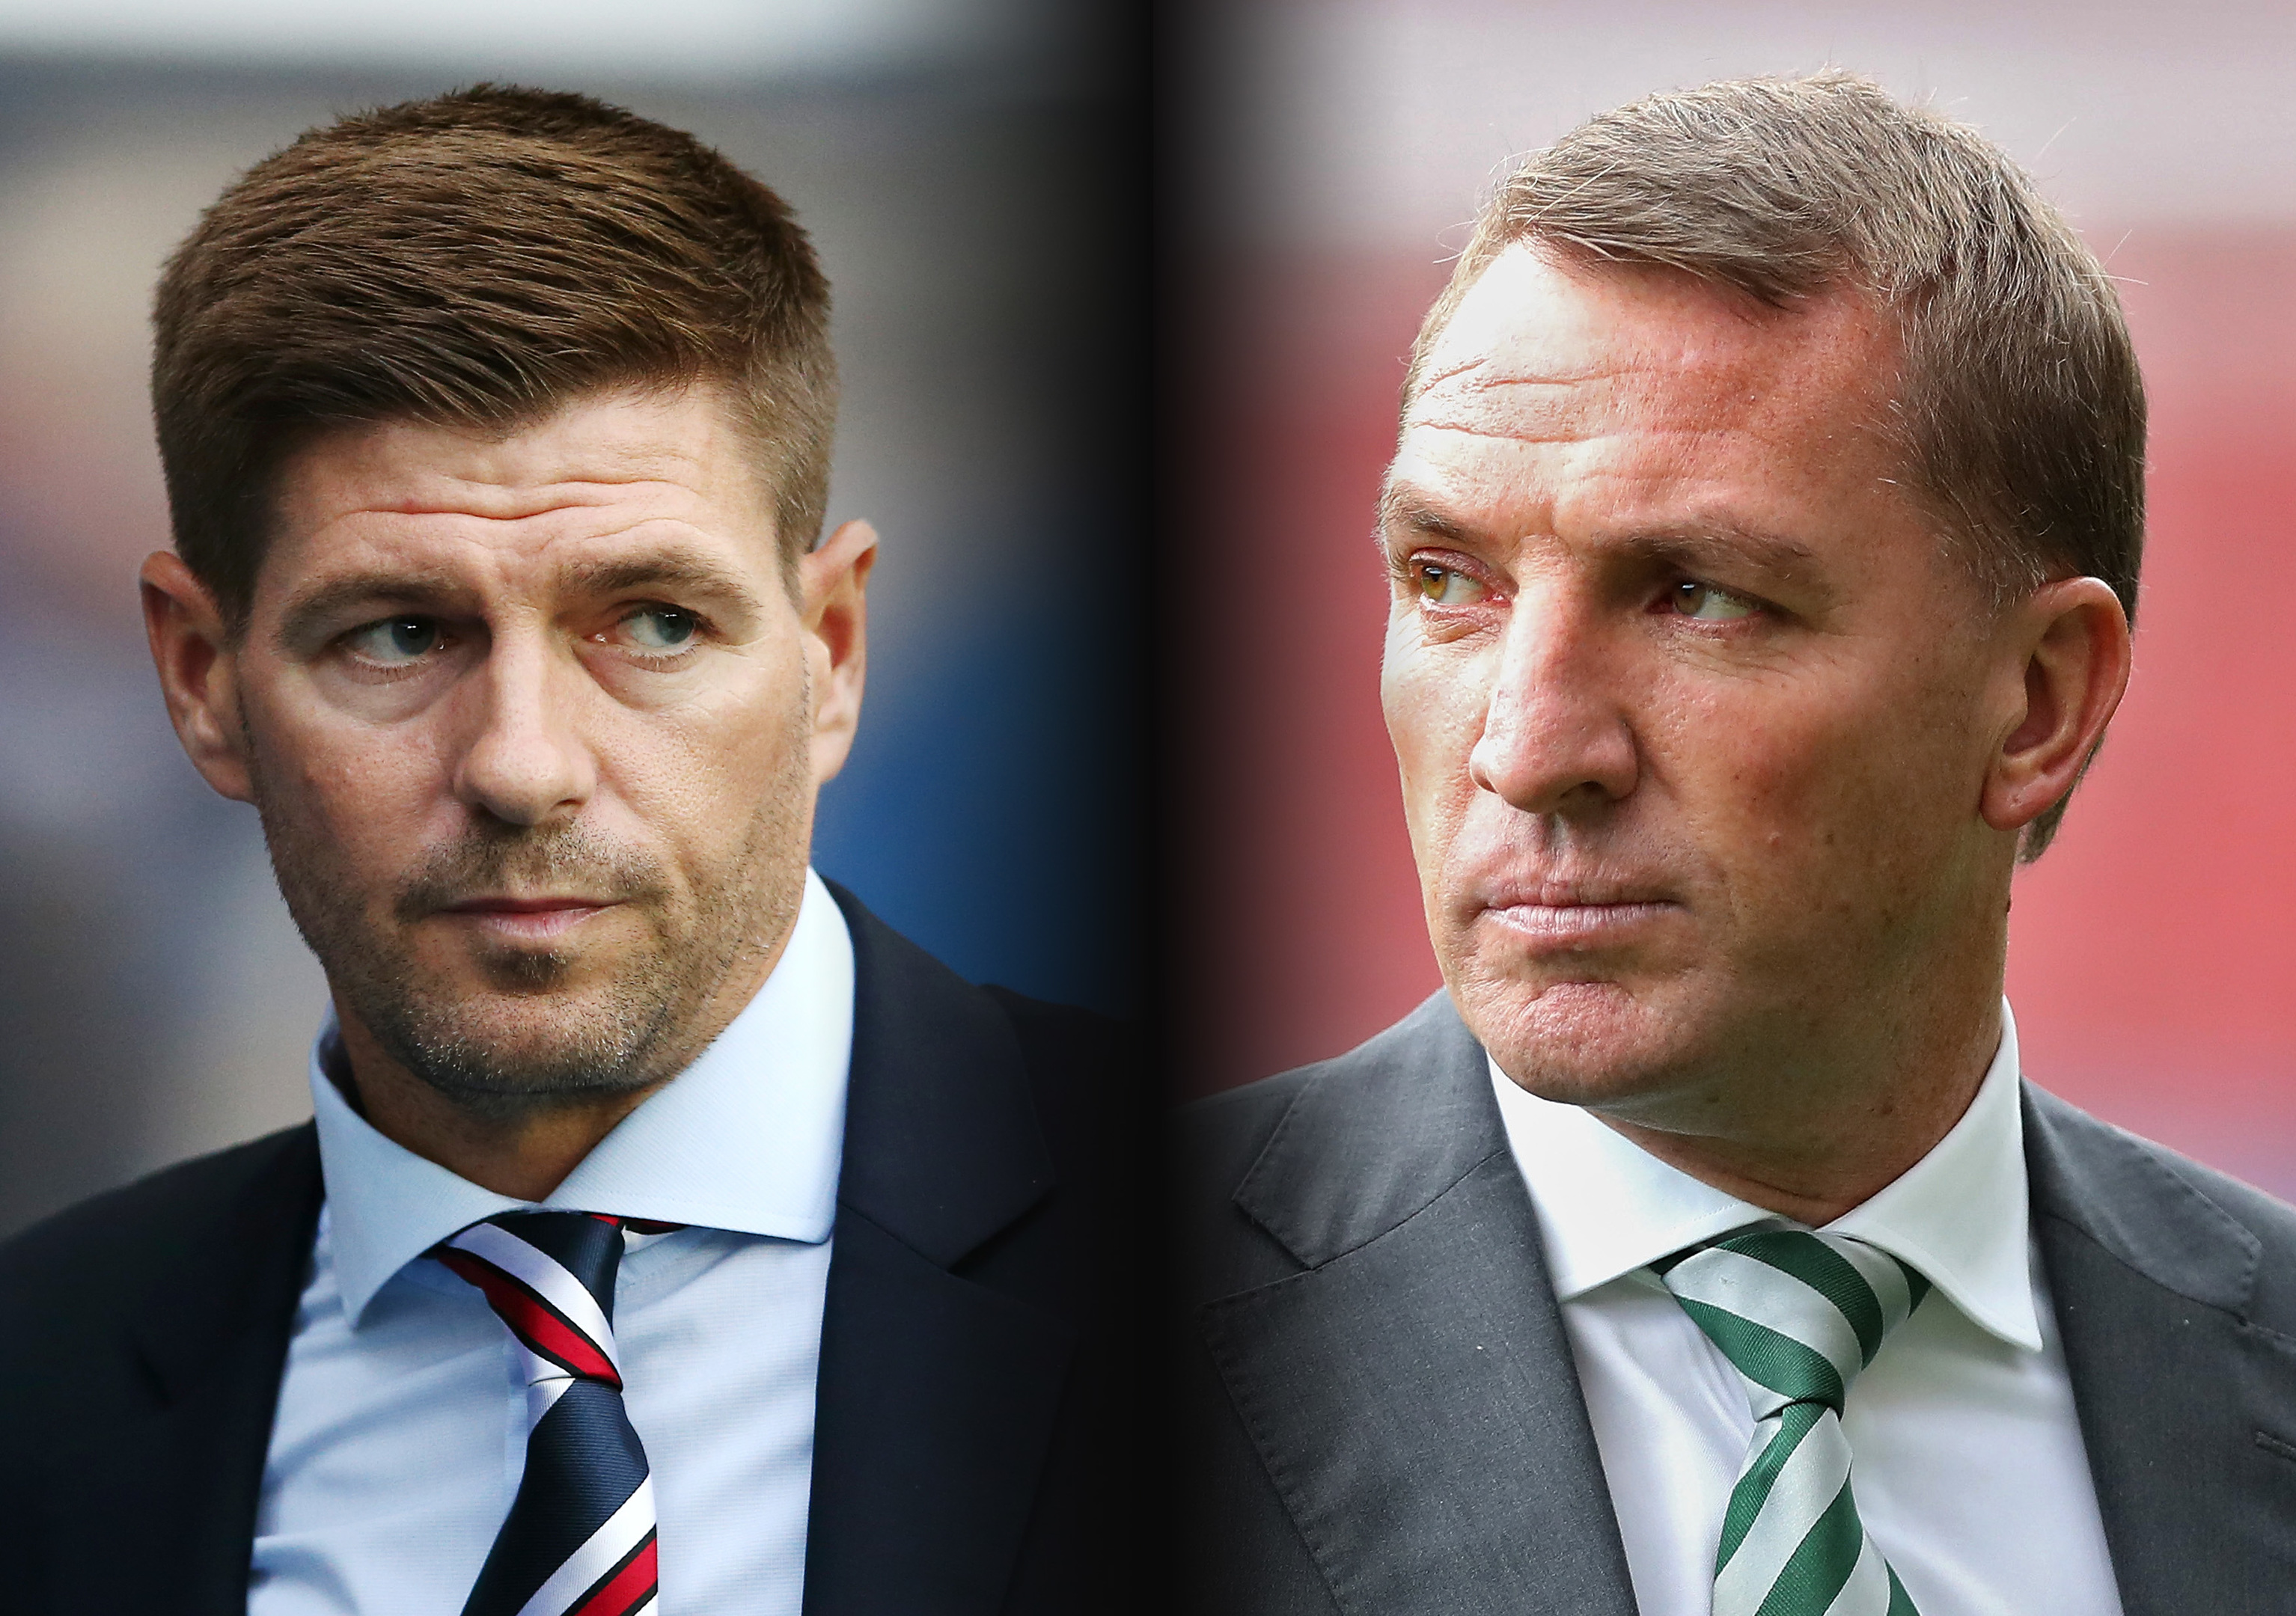 Steven Gerrard (L) and Brendan Rodgers will lead their sides into Europe this season (Jan Kruger & Ian MacNicol/Getty Images)